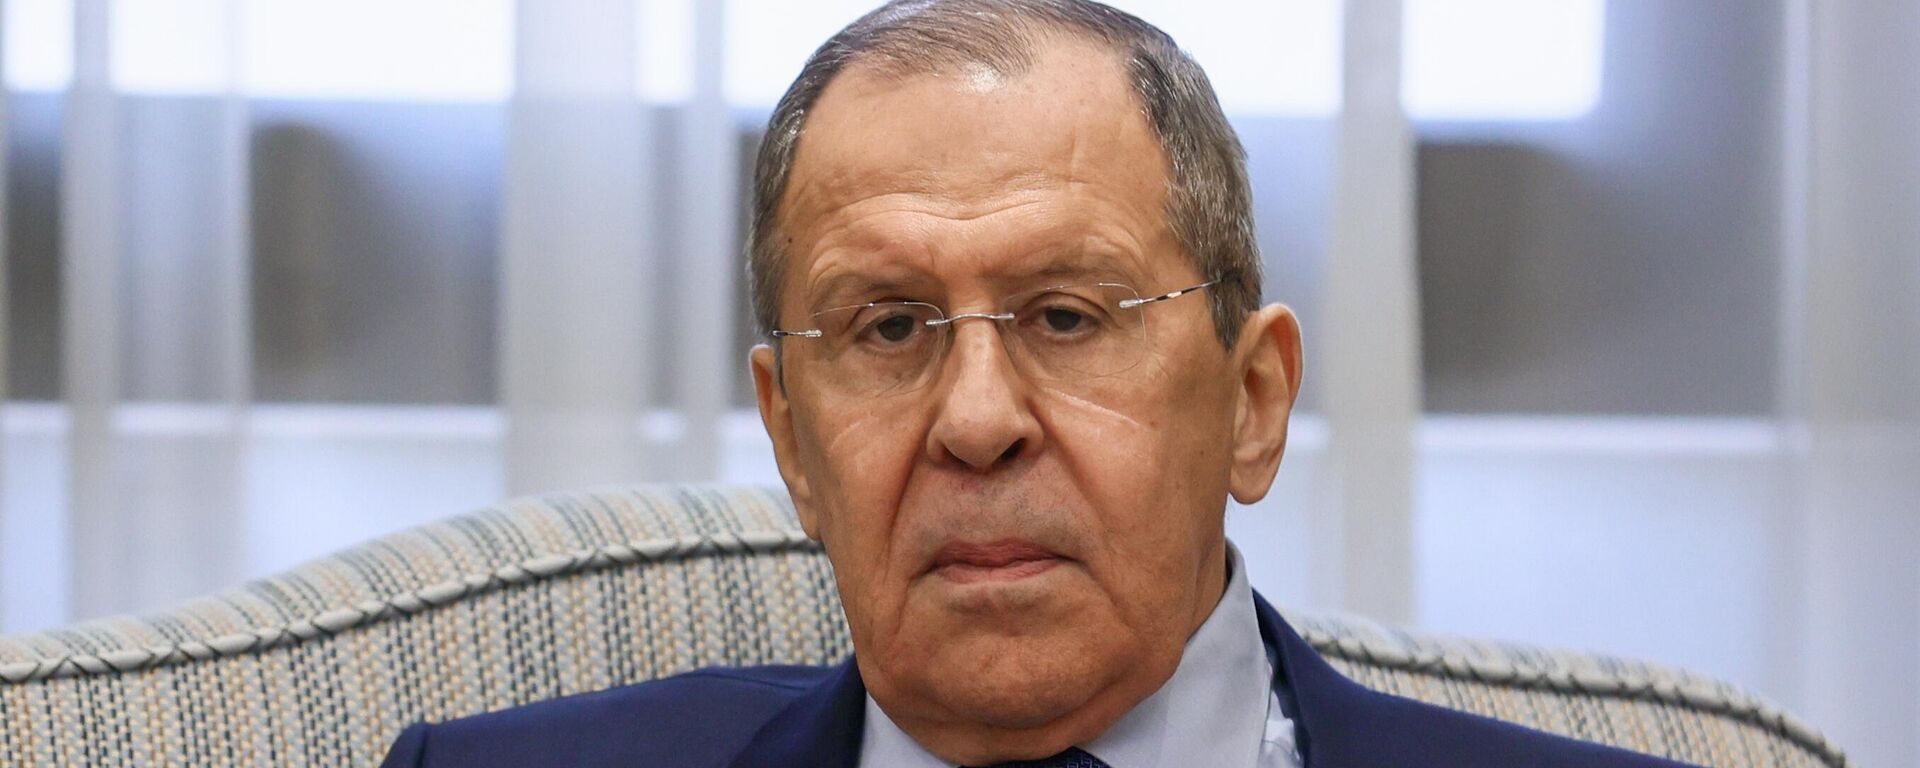 Russian Foreign Minister Sergey Lavrov at a meeting with Secretary General of the Organization of Islamic Cooperation (OIC) Hussein Ibrahim Taha in Riyadh as part of his visit to Saudi Arabia. - Sputnik International, 1920, 31.05.2022